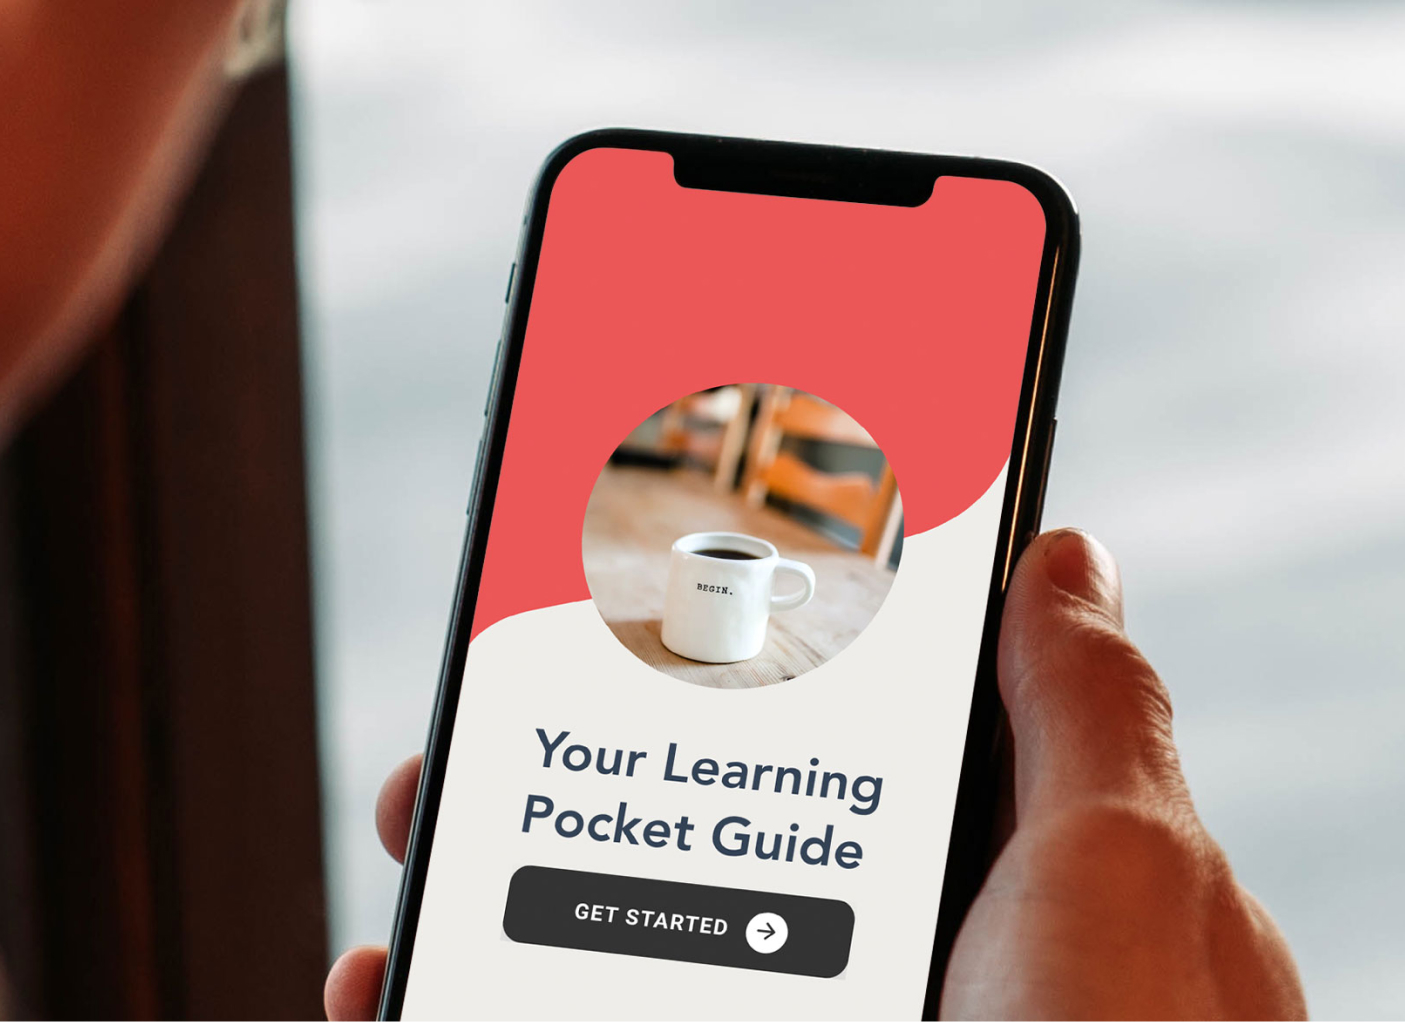 Designing for Employee Learning Experiences: a Mobile Pocket Guide